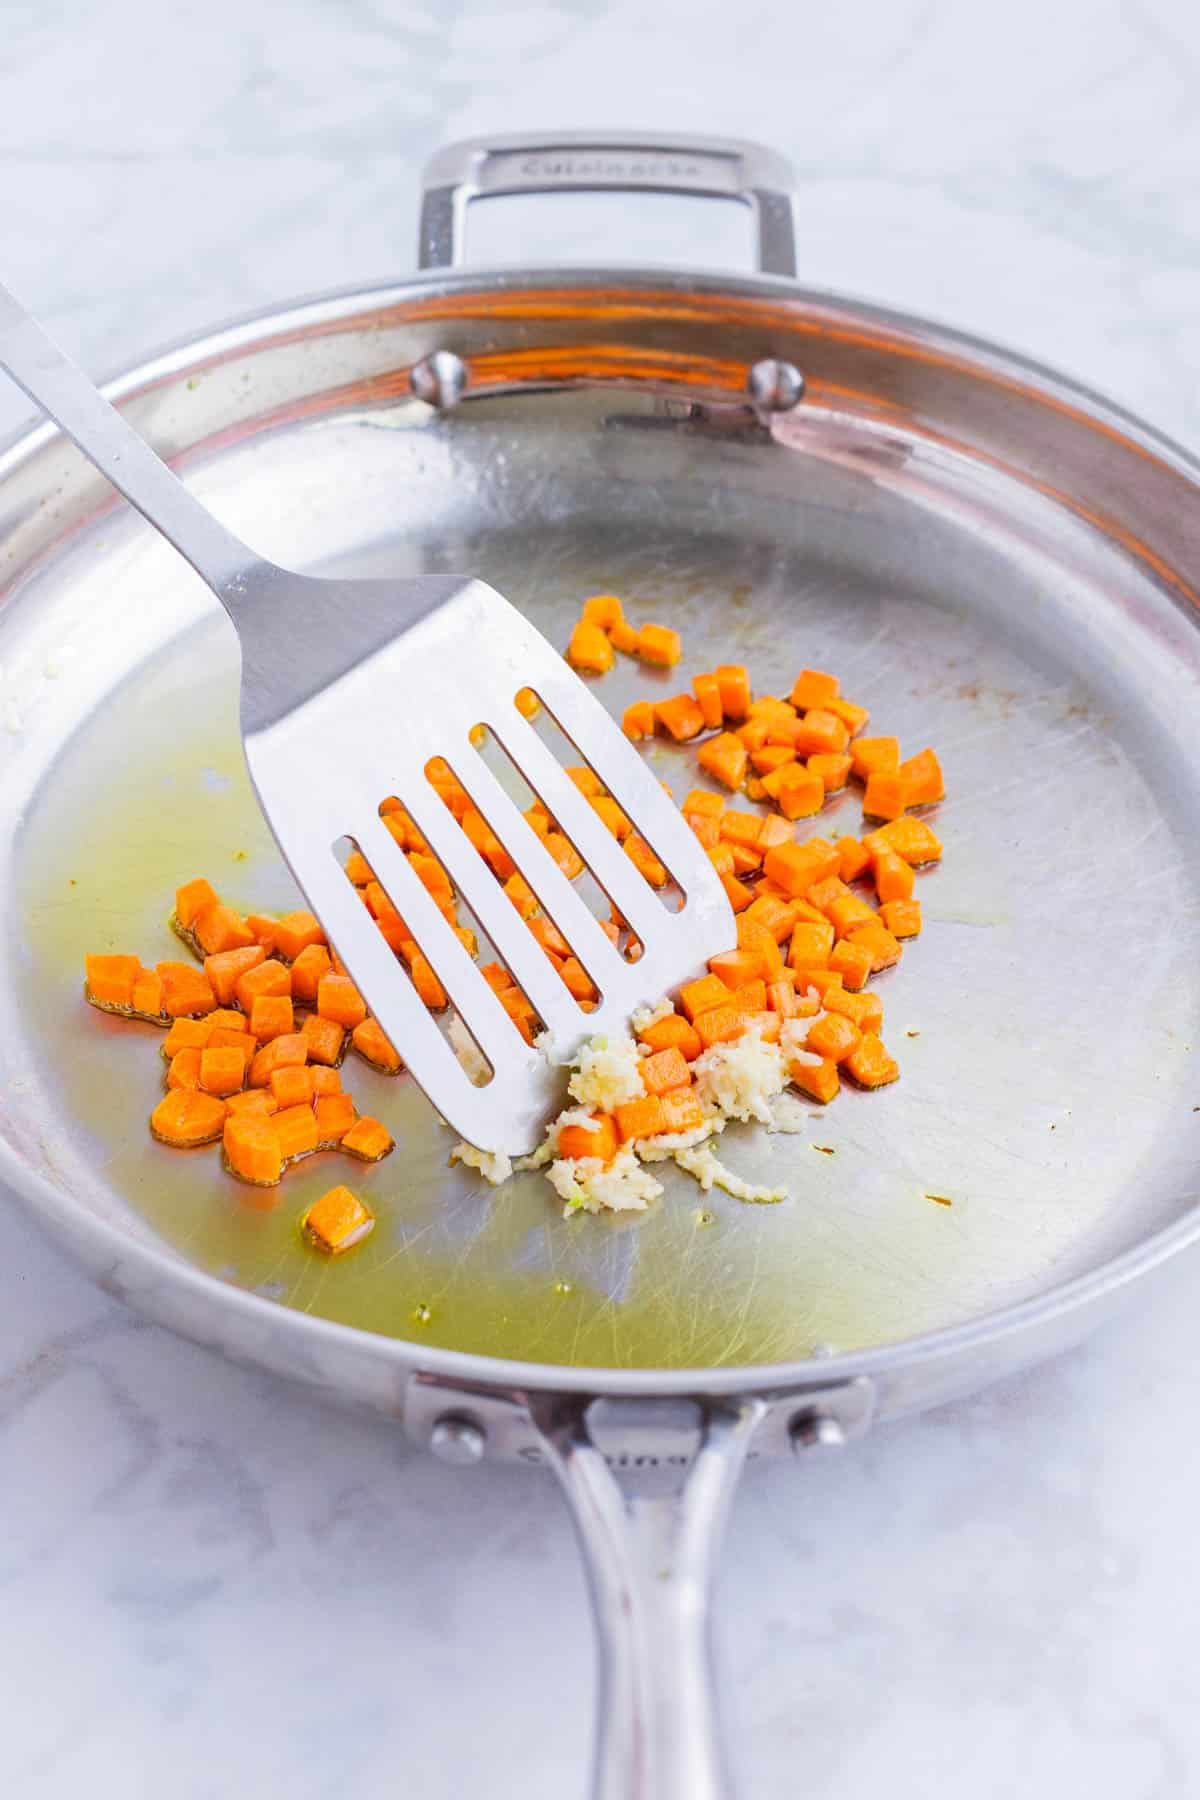 Carrots are sautéed in a skillet.